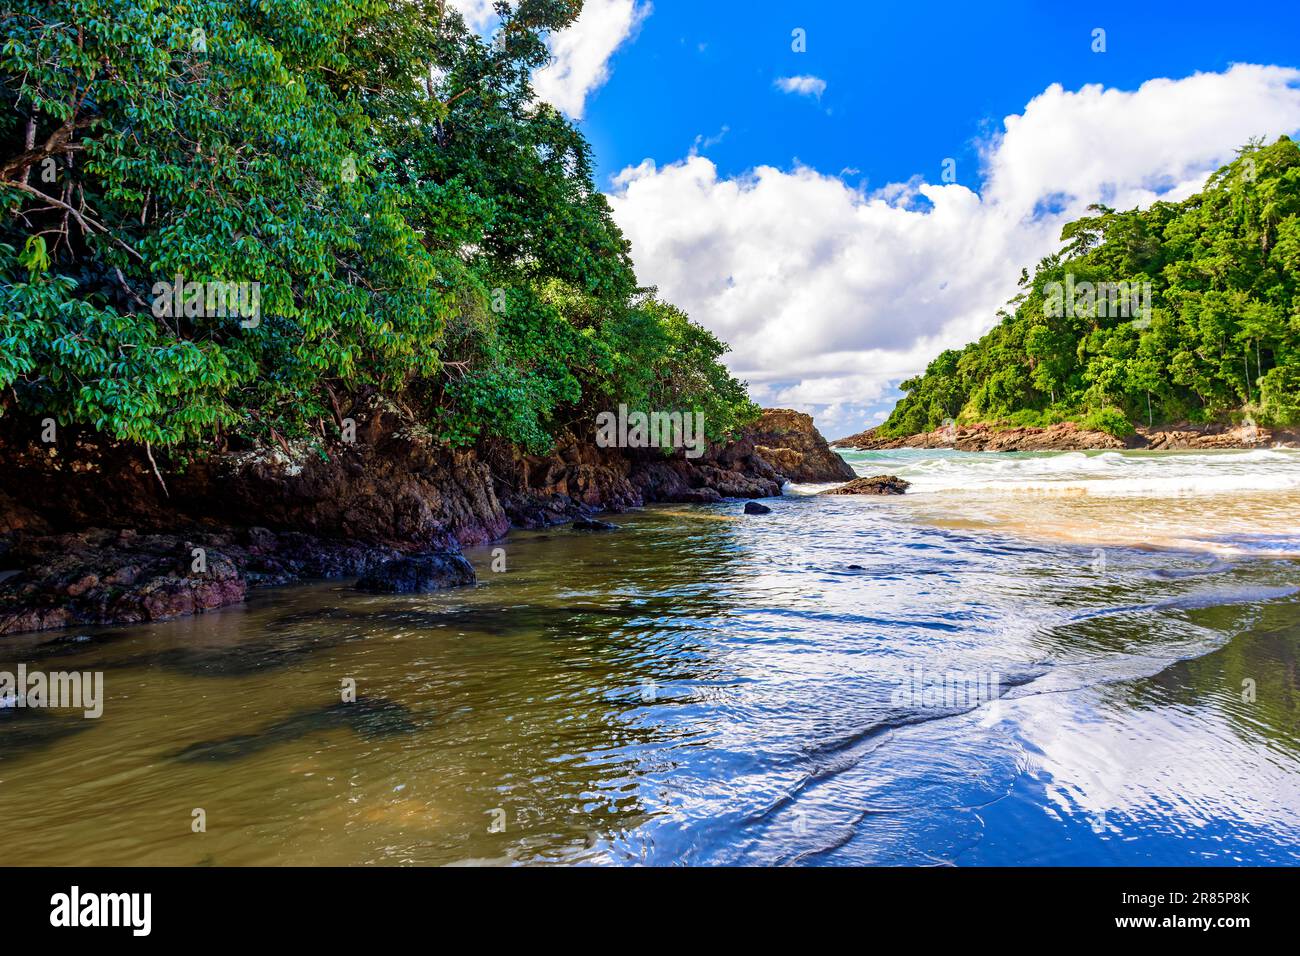 Paradisiacal and preserved beach in Itacare in Bahia between the tropical forest and the rocks Stock Photo